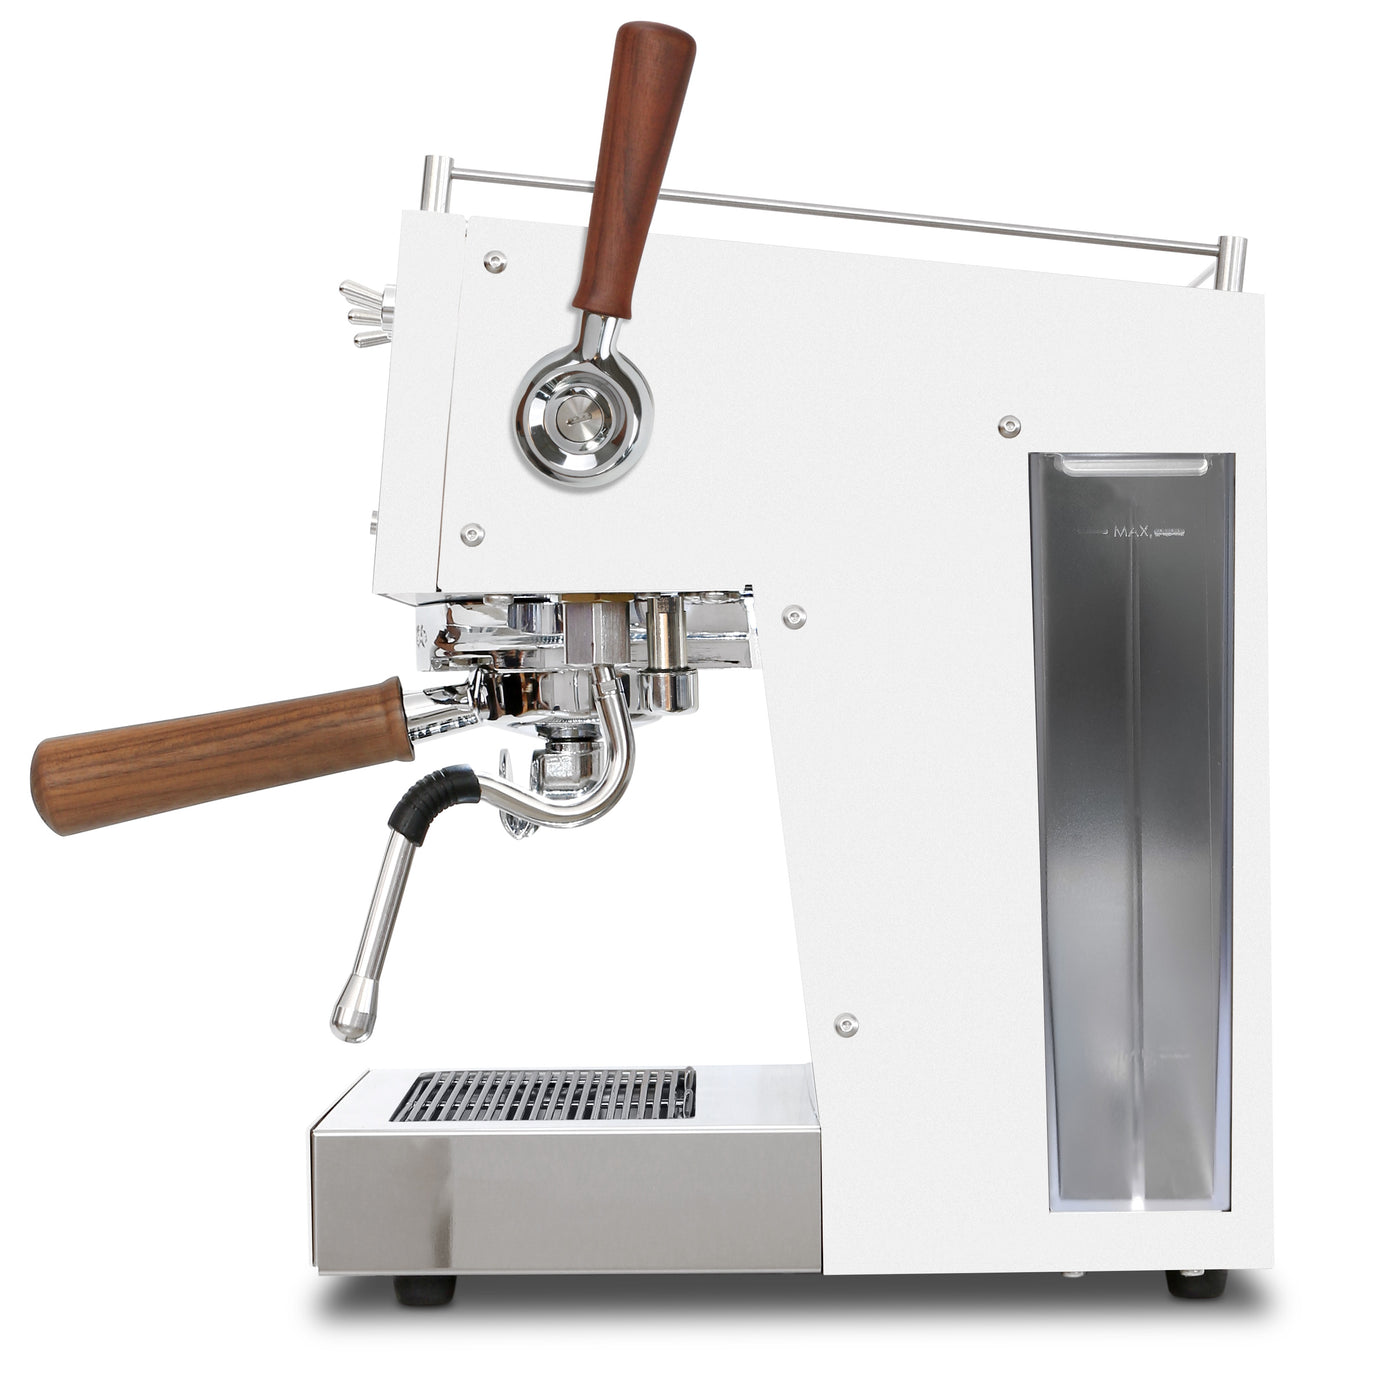 Ascaso Steel Duo Plus in White and Walnut wood - view of the right hand side of the Espresso machine